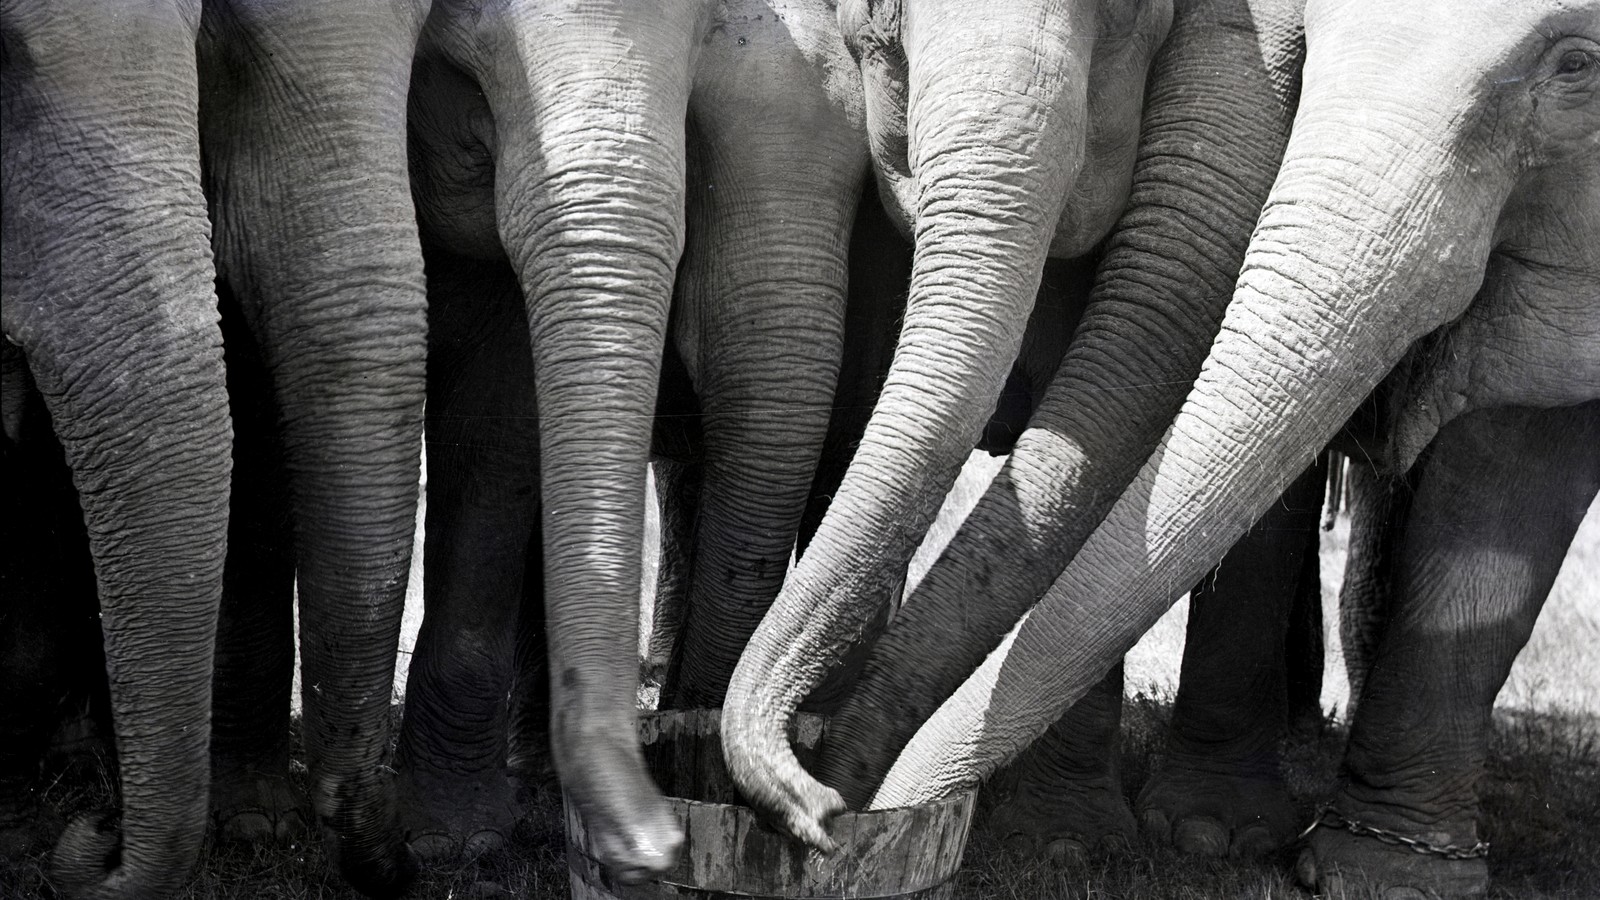 What Can't Elephant Trunks Do? - The Atlantic